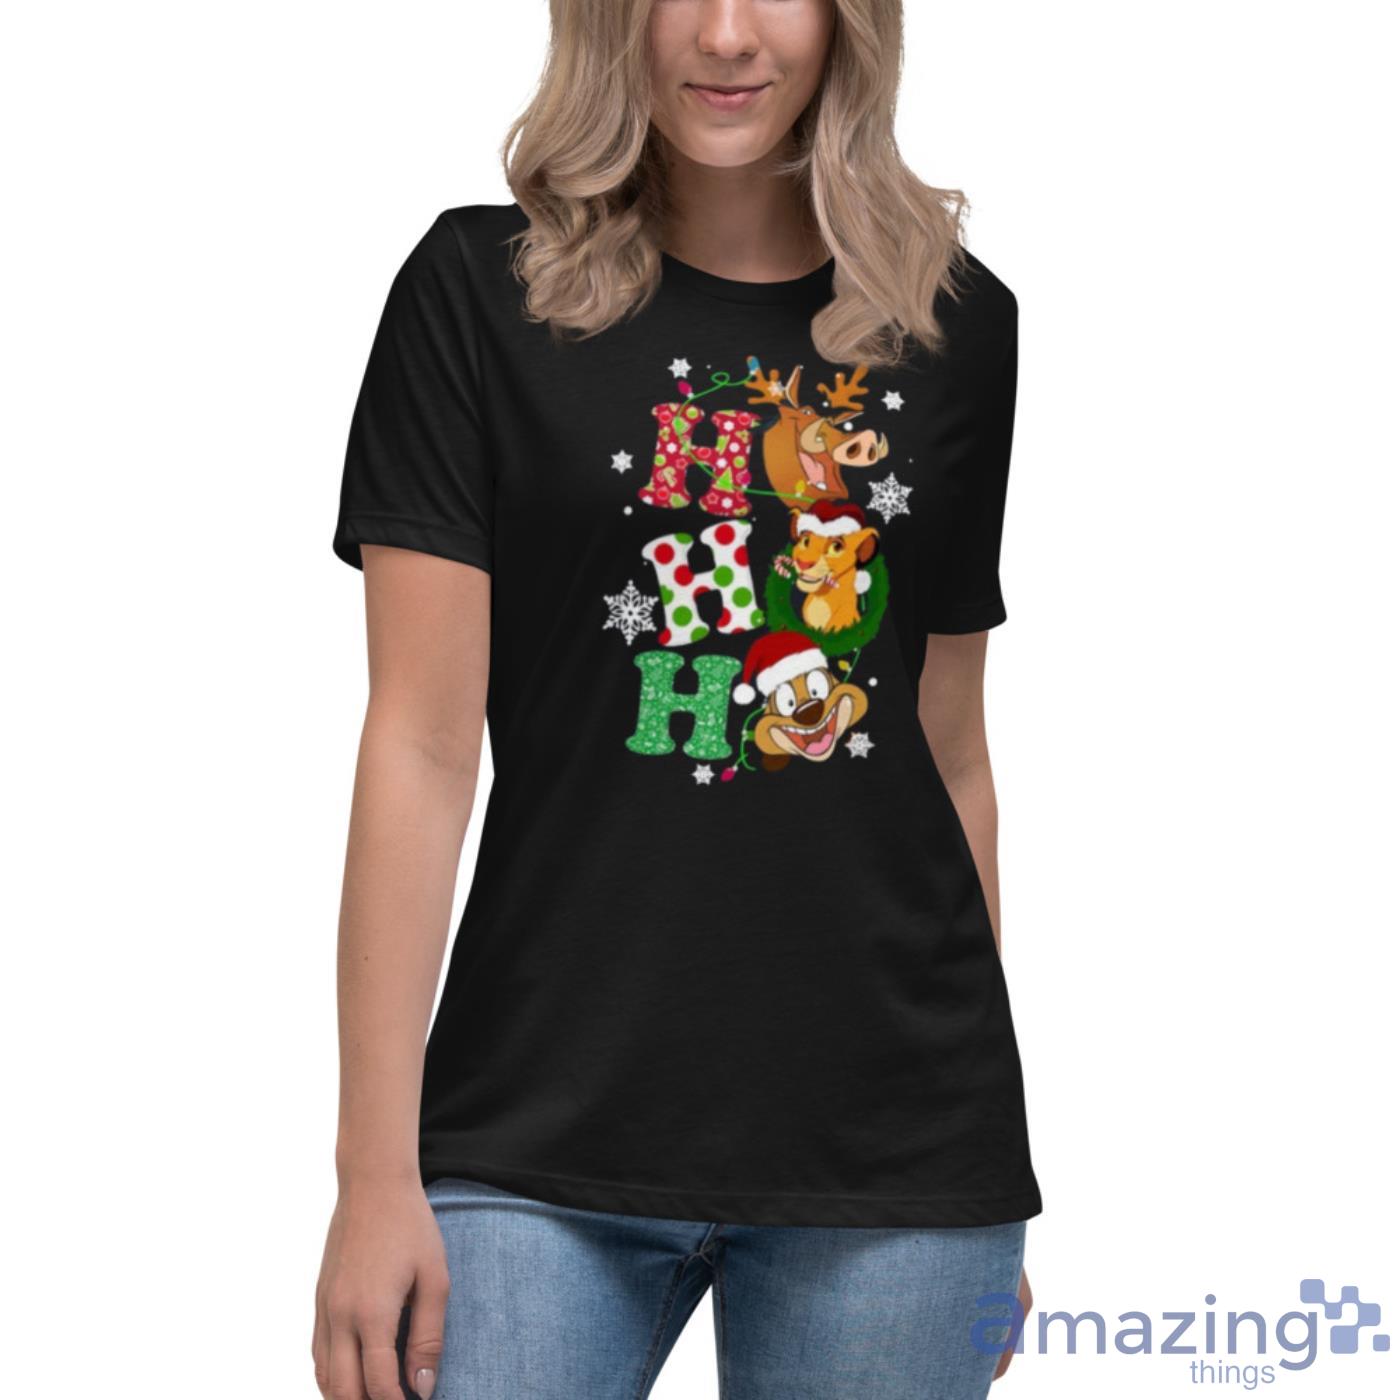 These Are A Few of My Favorite Things Shirt, Disney Christmas Shirt, Disney Christmas Kids Shirt,cute Christmas, Disney Green 4XL Long Sleeves | Supe